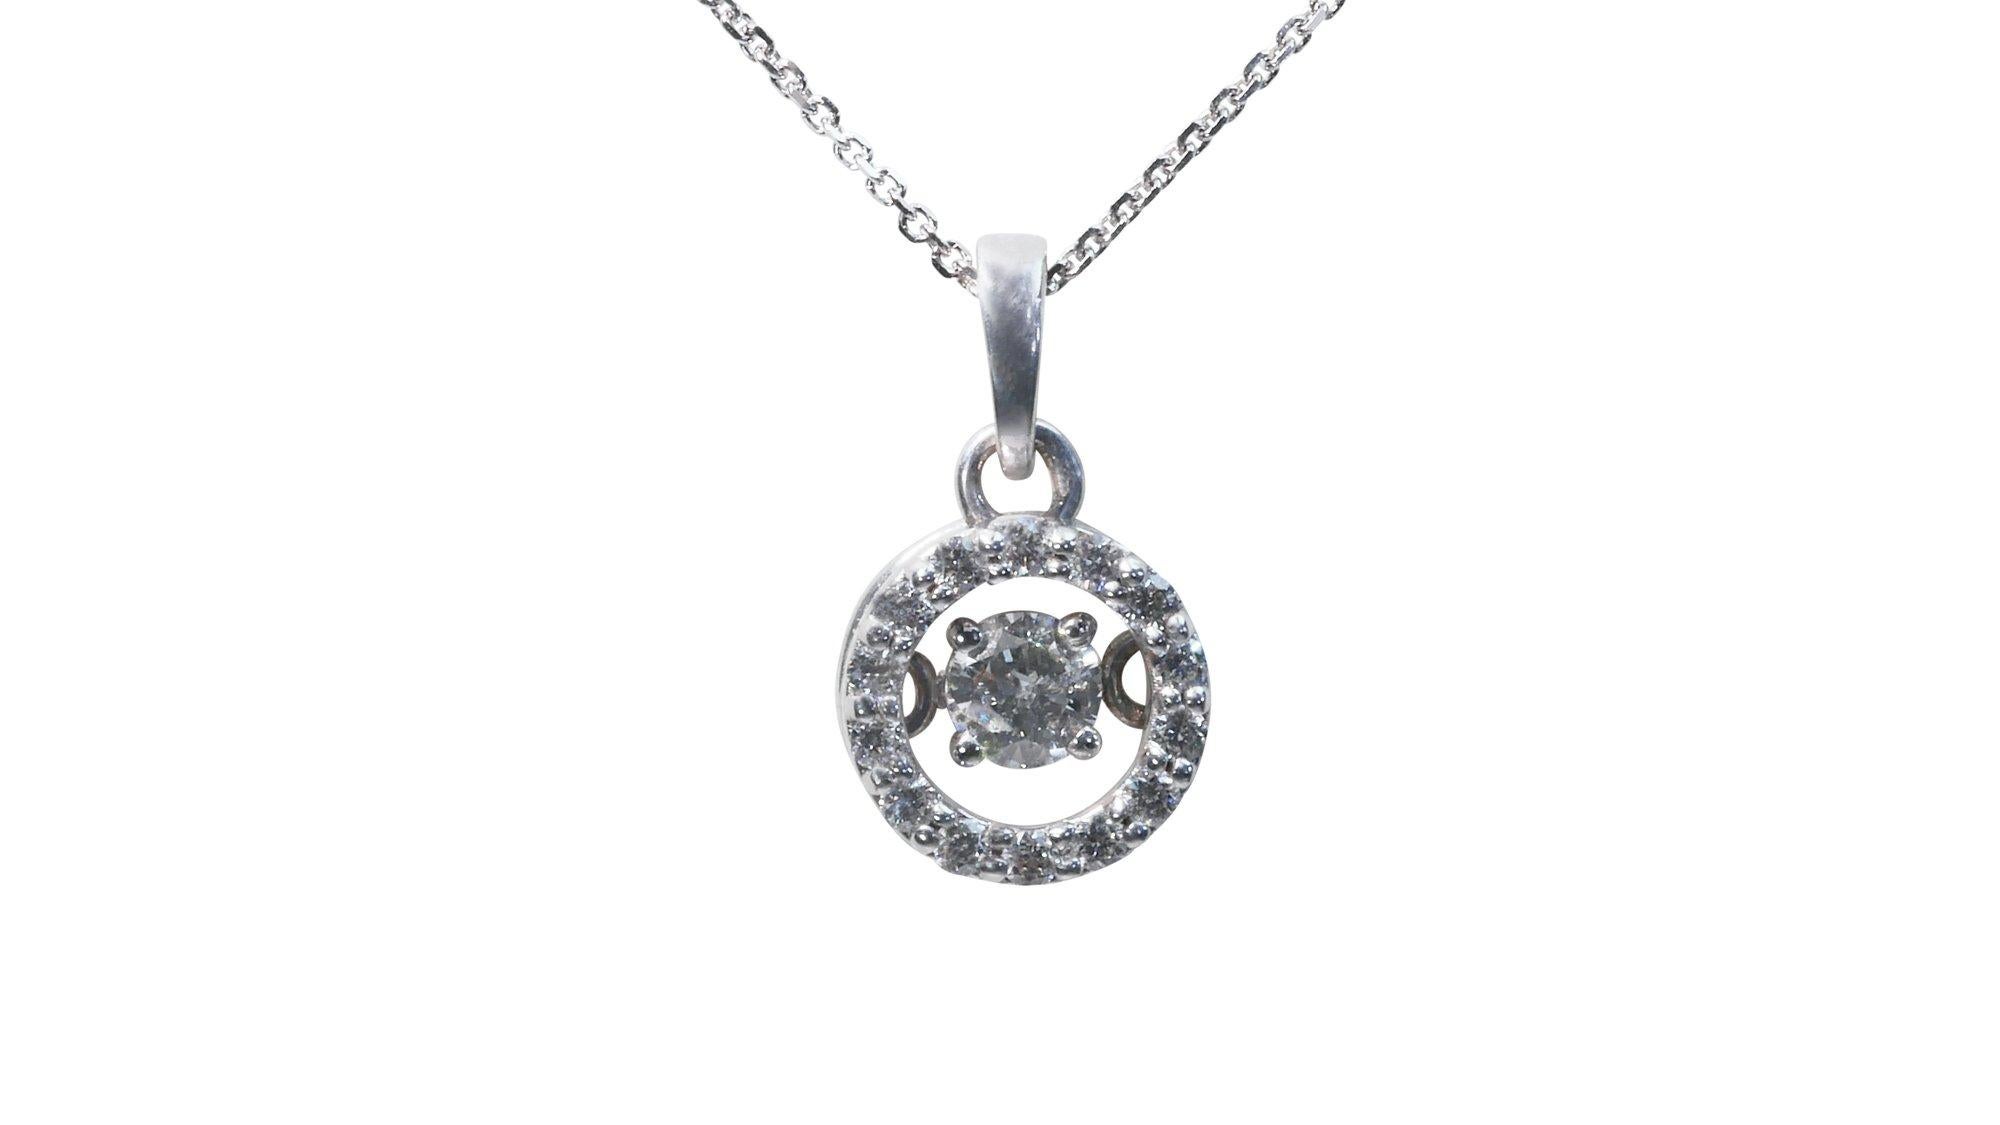 Beautiful White Gold Pendant with Chain with 0.35 Carat Natural Diamond-IGI Cert 2